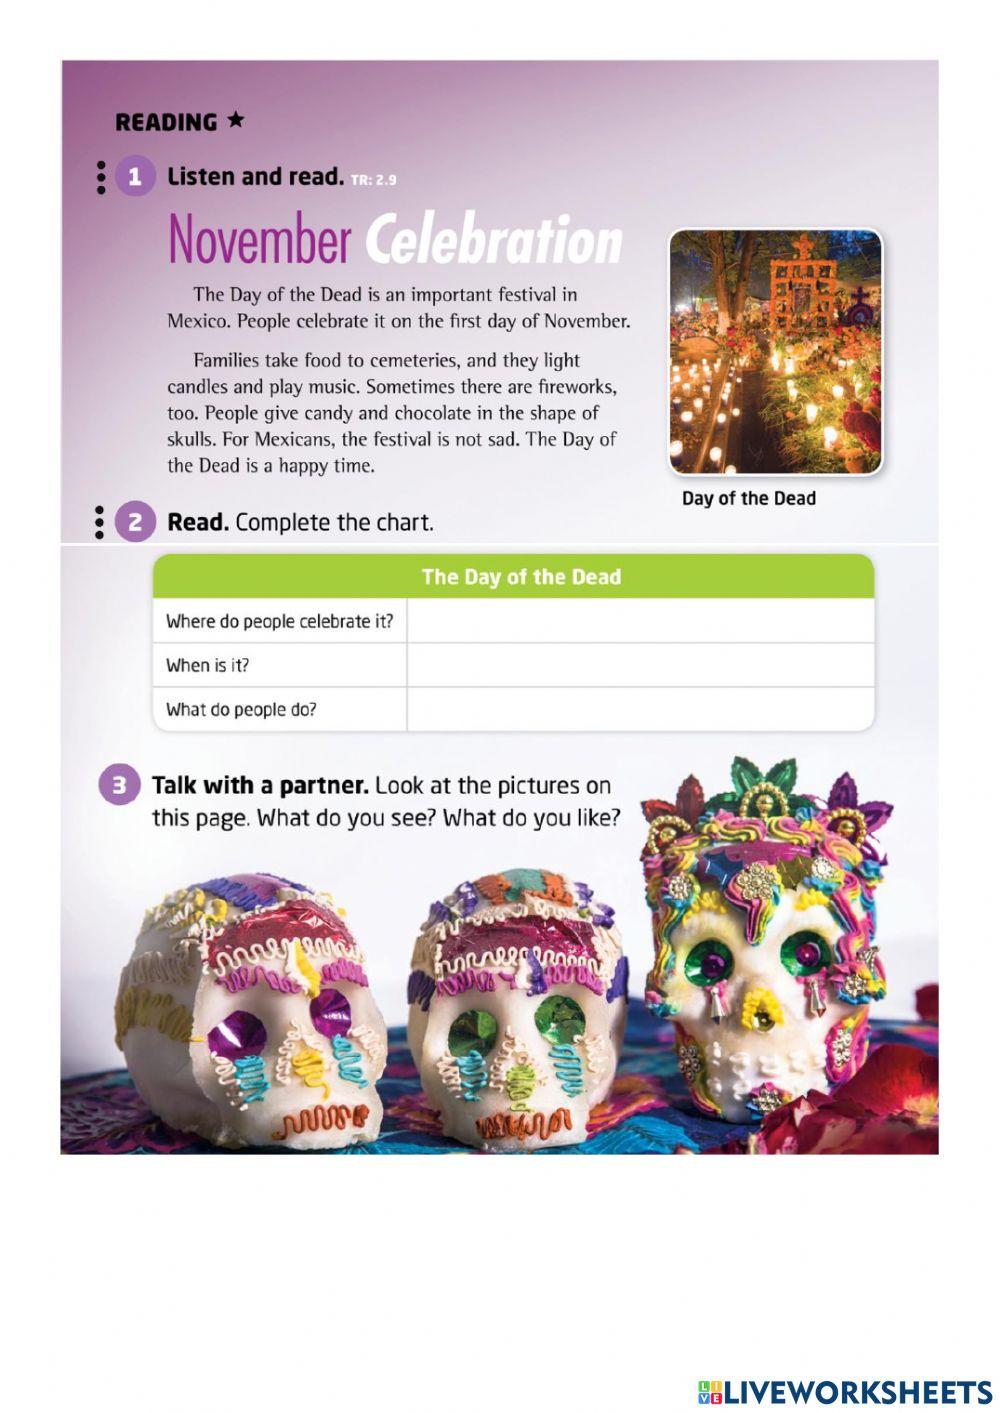 July 30th: Reading Day of the dead